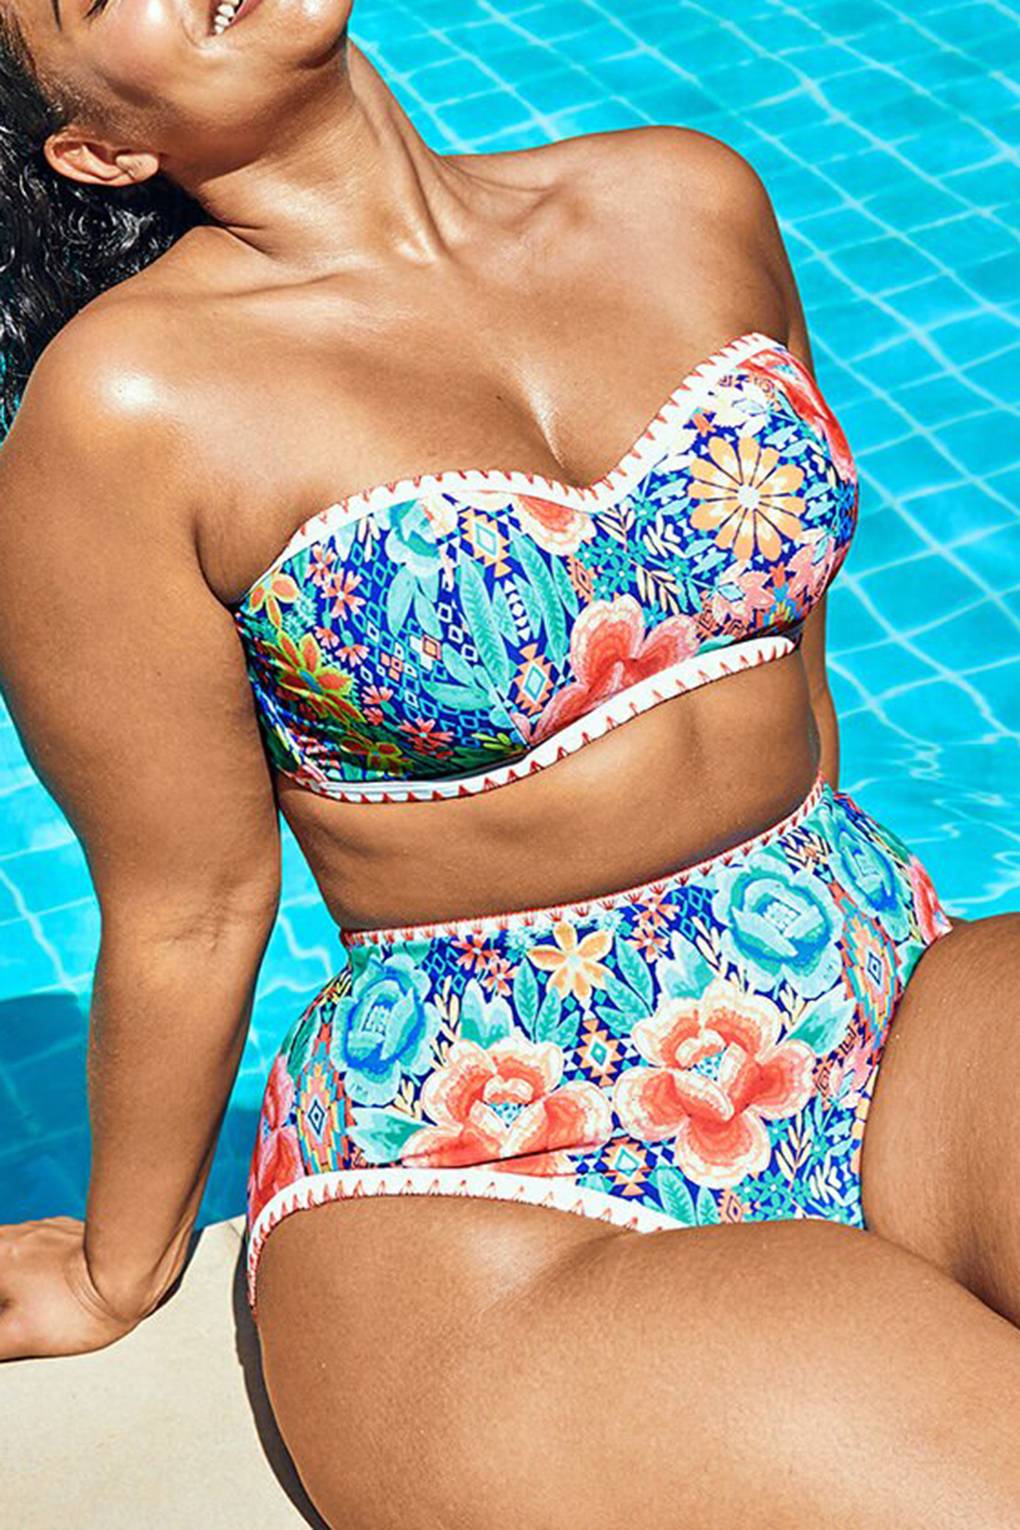 Best Swimwear For Big Busts Bikinis With Support Glamour Uk 4241